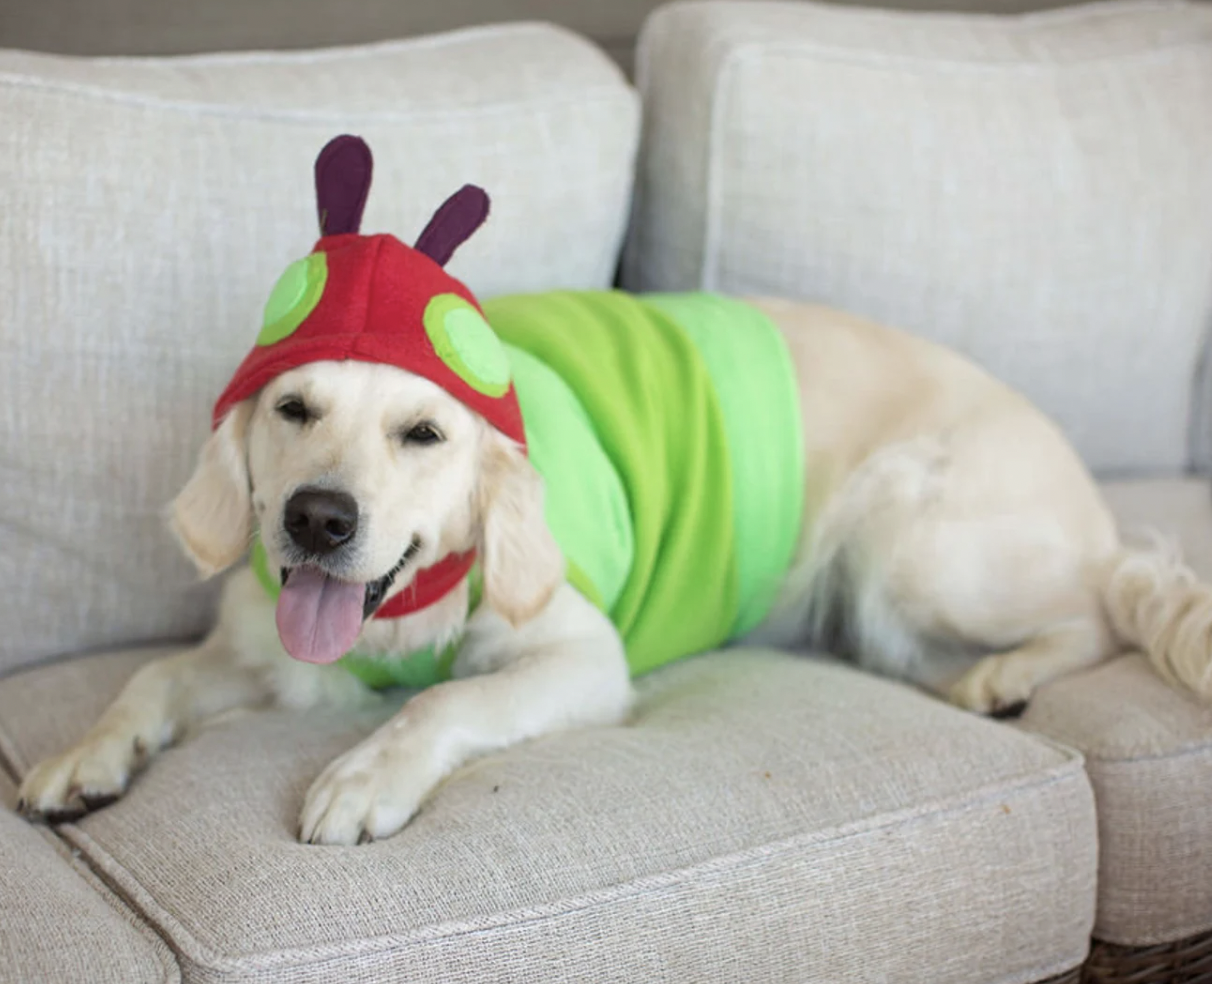 Yellow lab in a green felt shirt and red and green hat like The Very Hungry Caterpillar